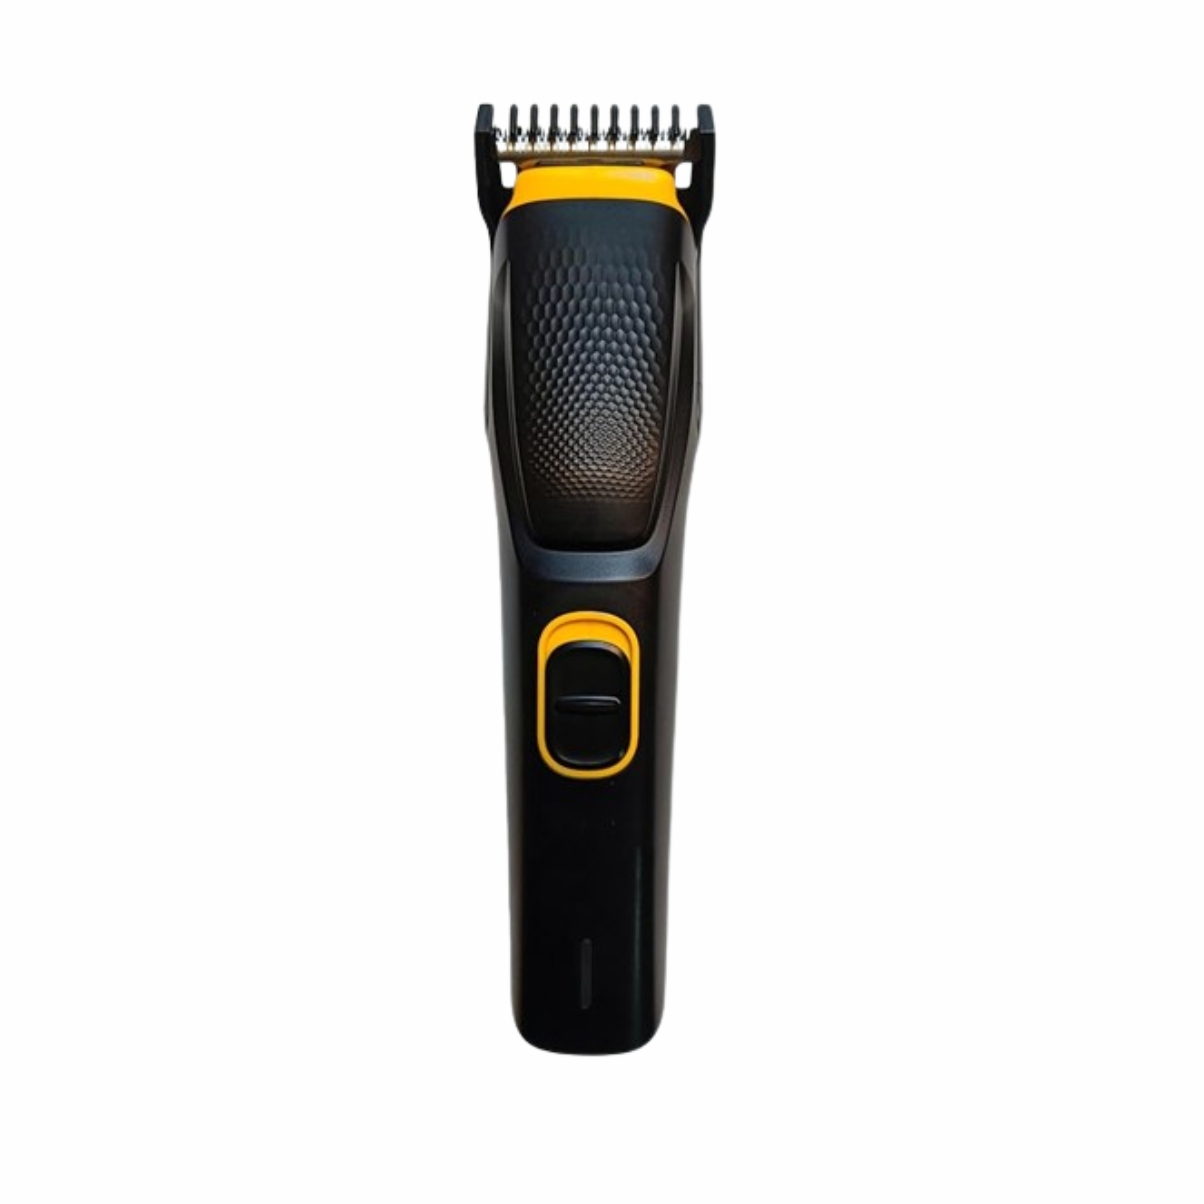 LUXURY HTC AT-509 Cordless & Rechargeable Trimmer with 8 Length Settings and Self-Sharpening Blades for Beard and Hair Care